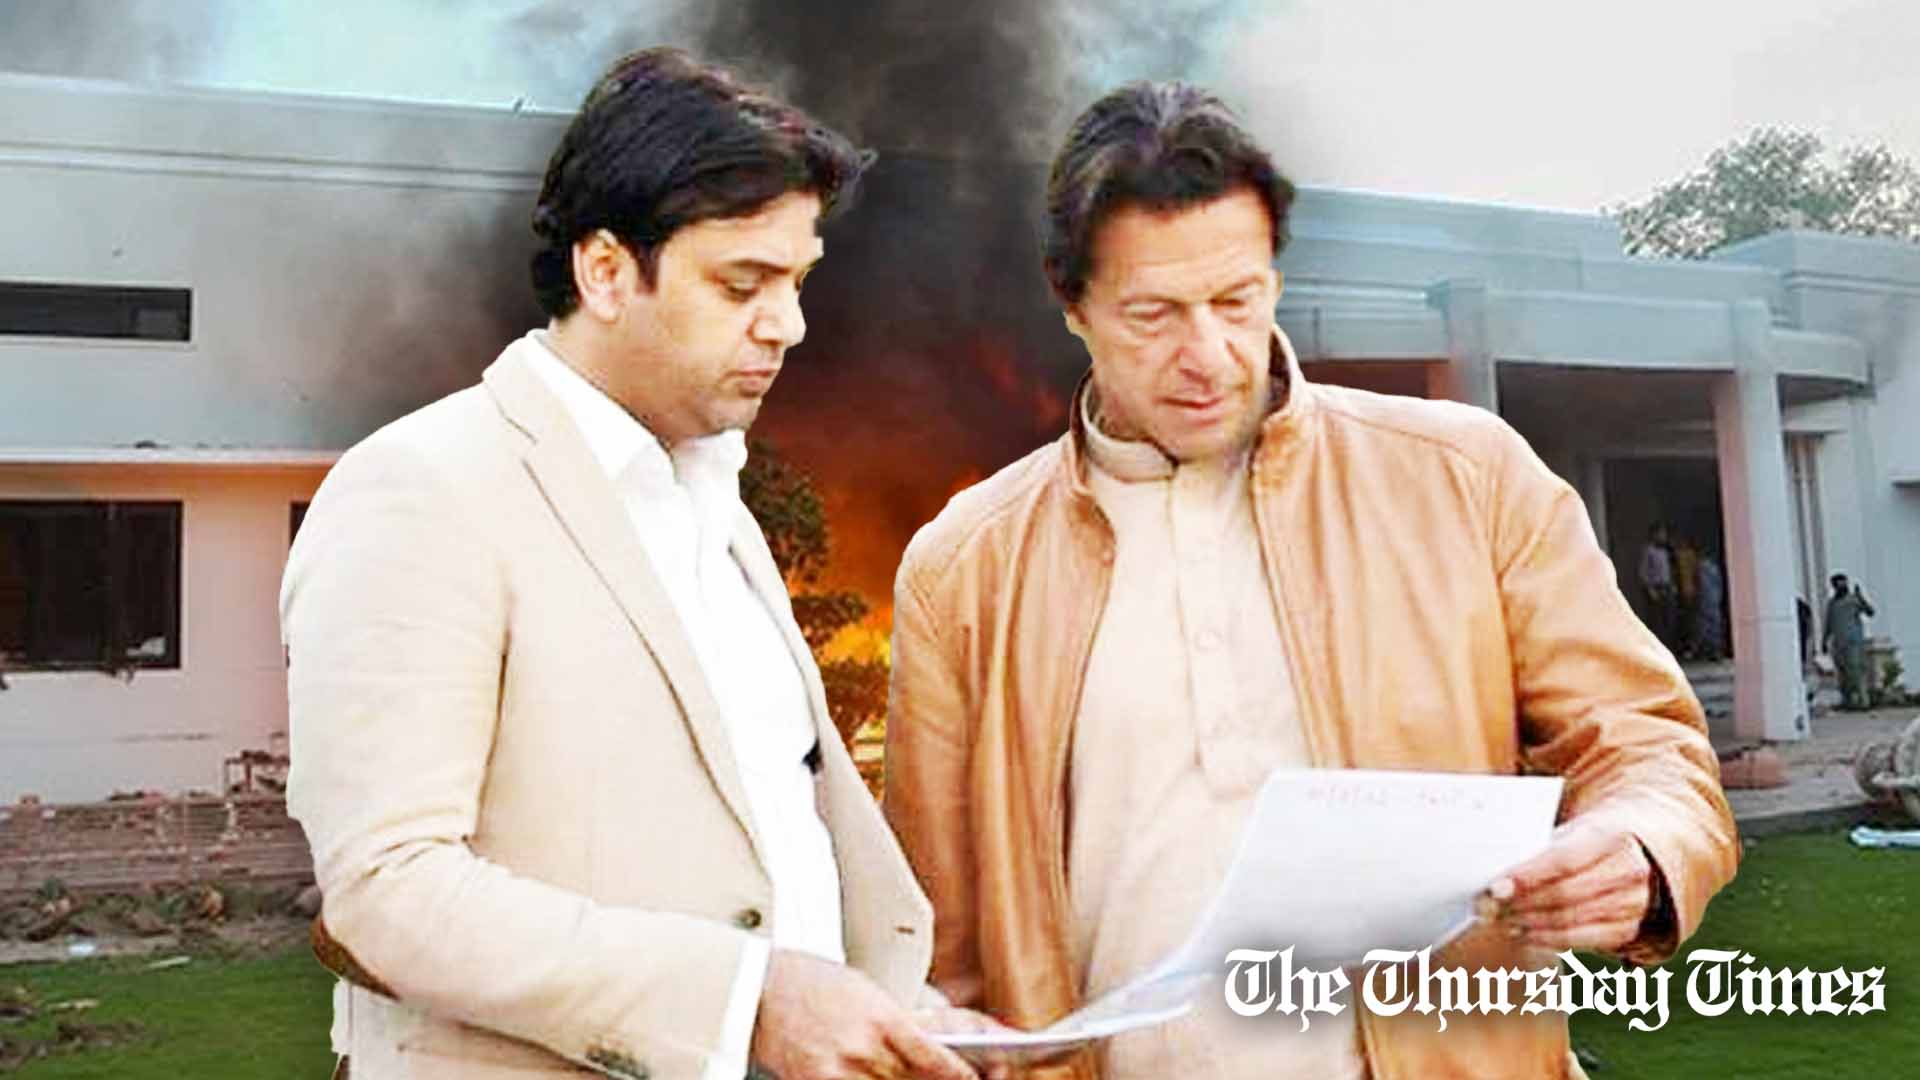 A file photo is shown of incumbent PTI chair Imran Khan (R) and former prime ministerial senior advisor Usman Dar (L) atop Jinnah House at Lahore. — FILE/THE THURSDAY TIMES